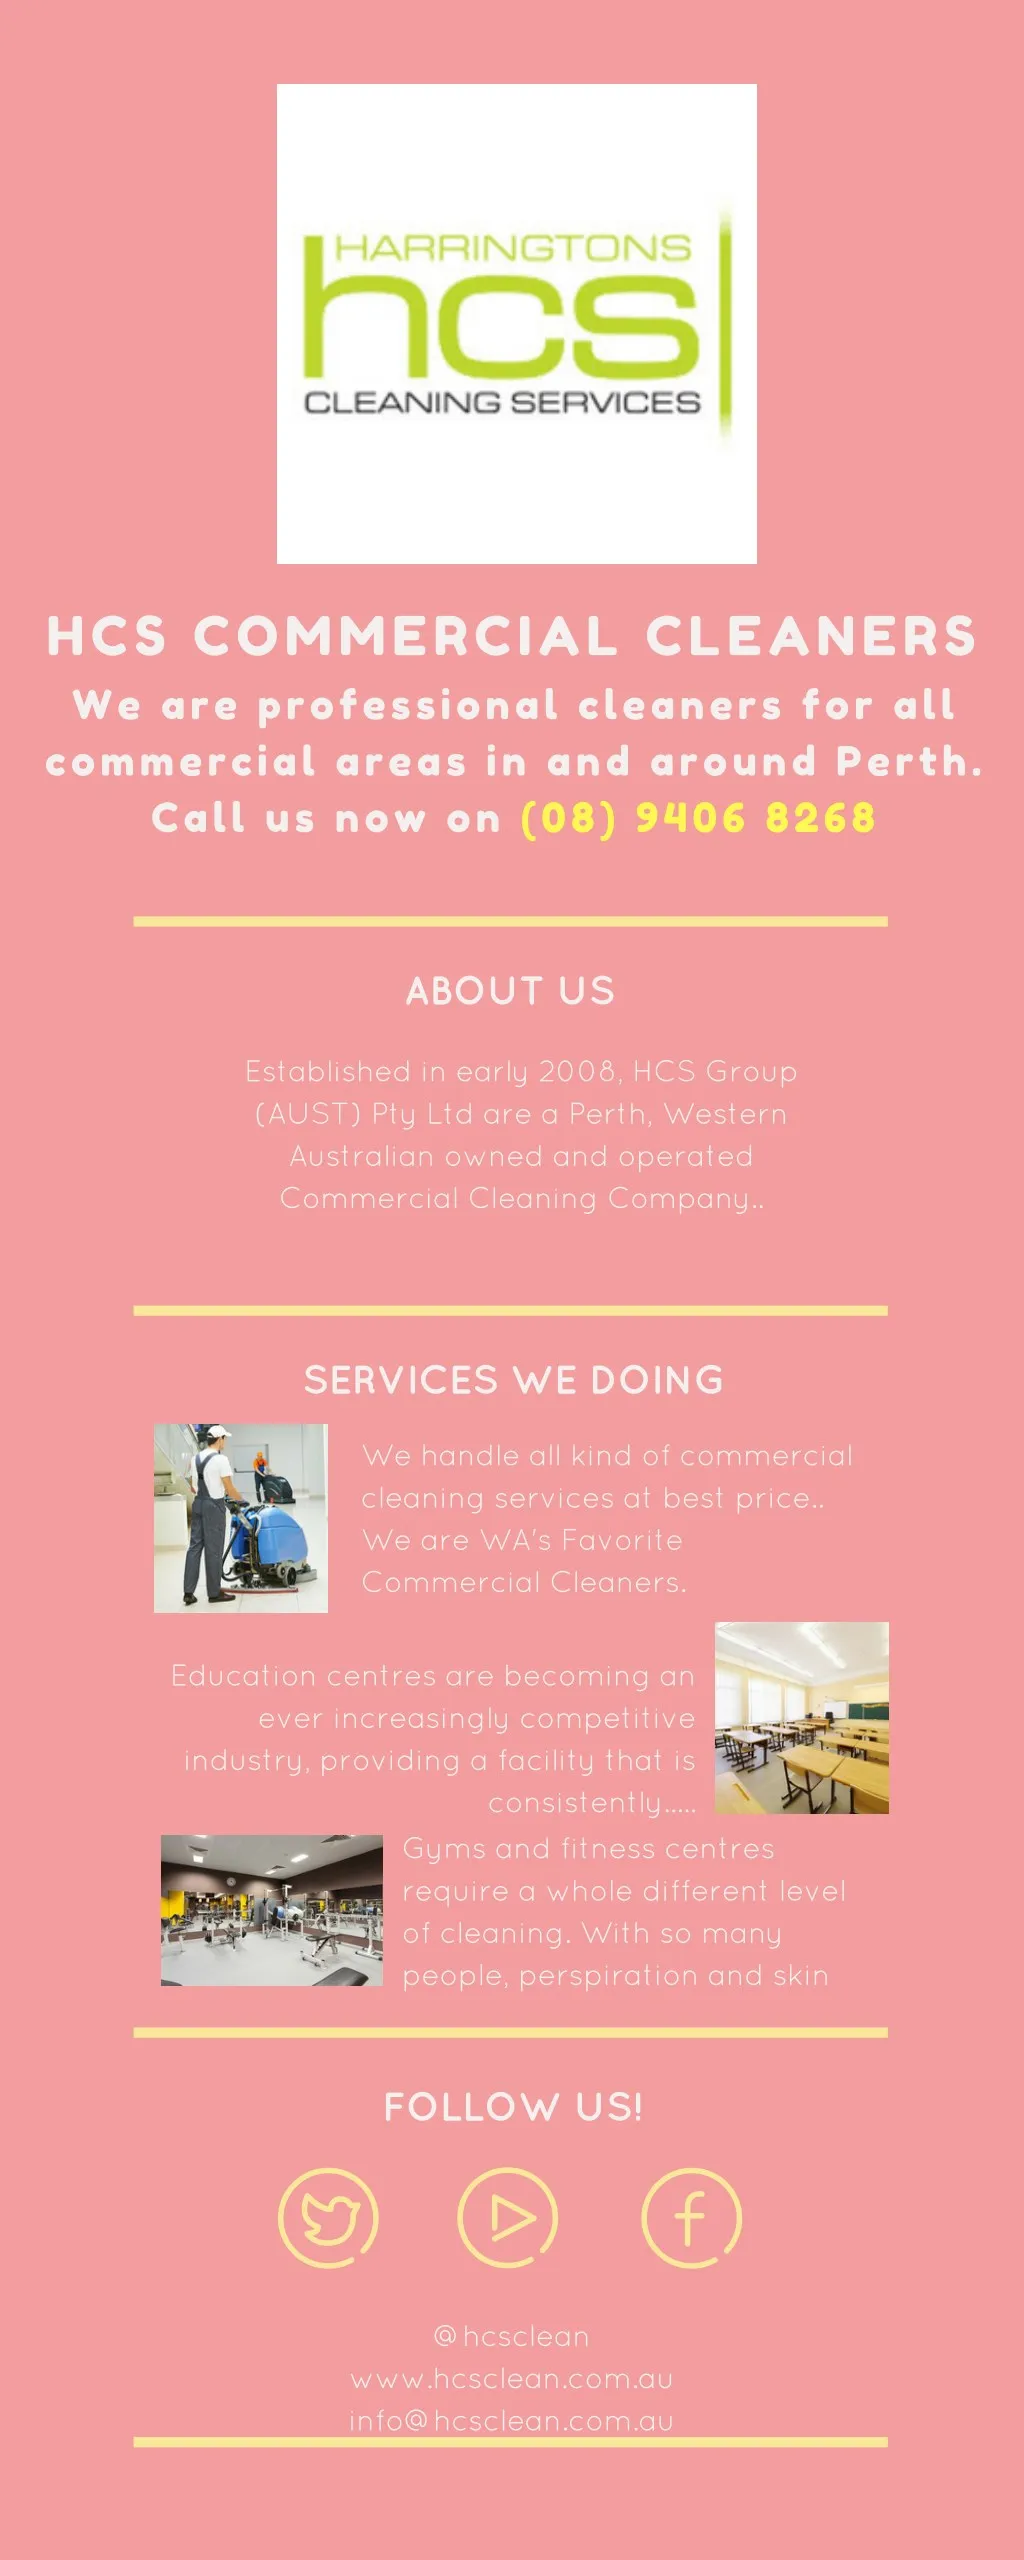 hcs commercial cleaners